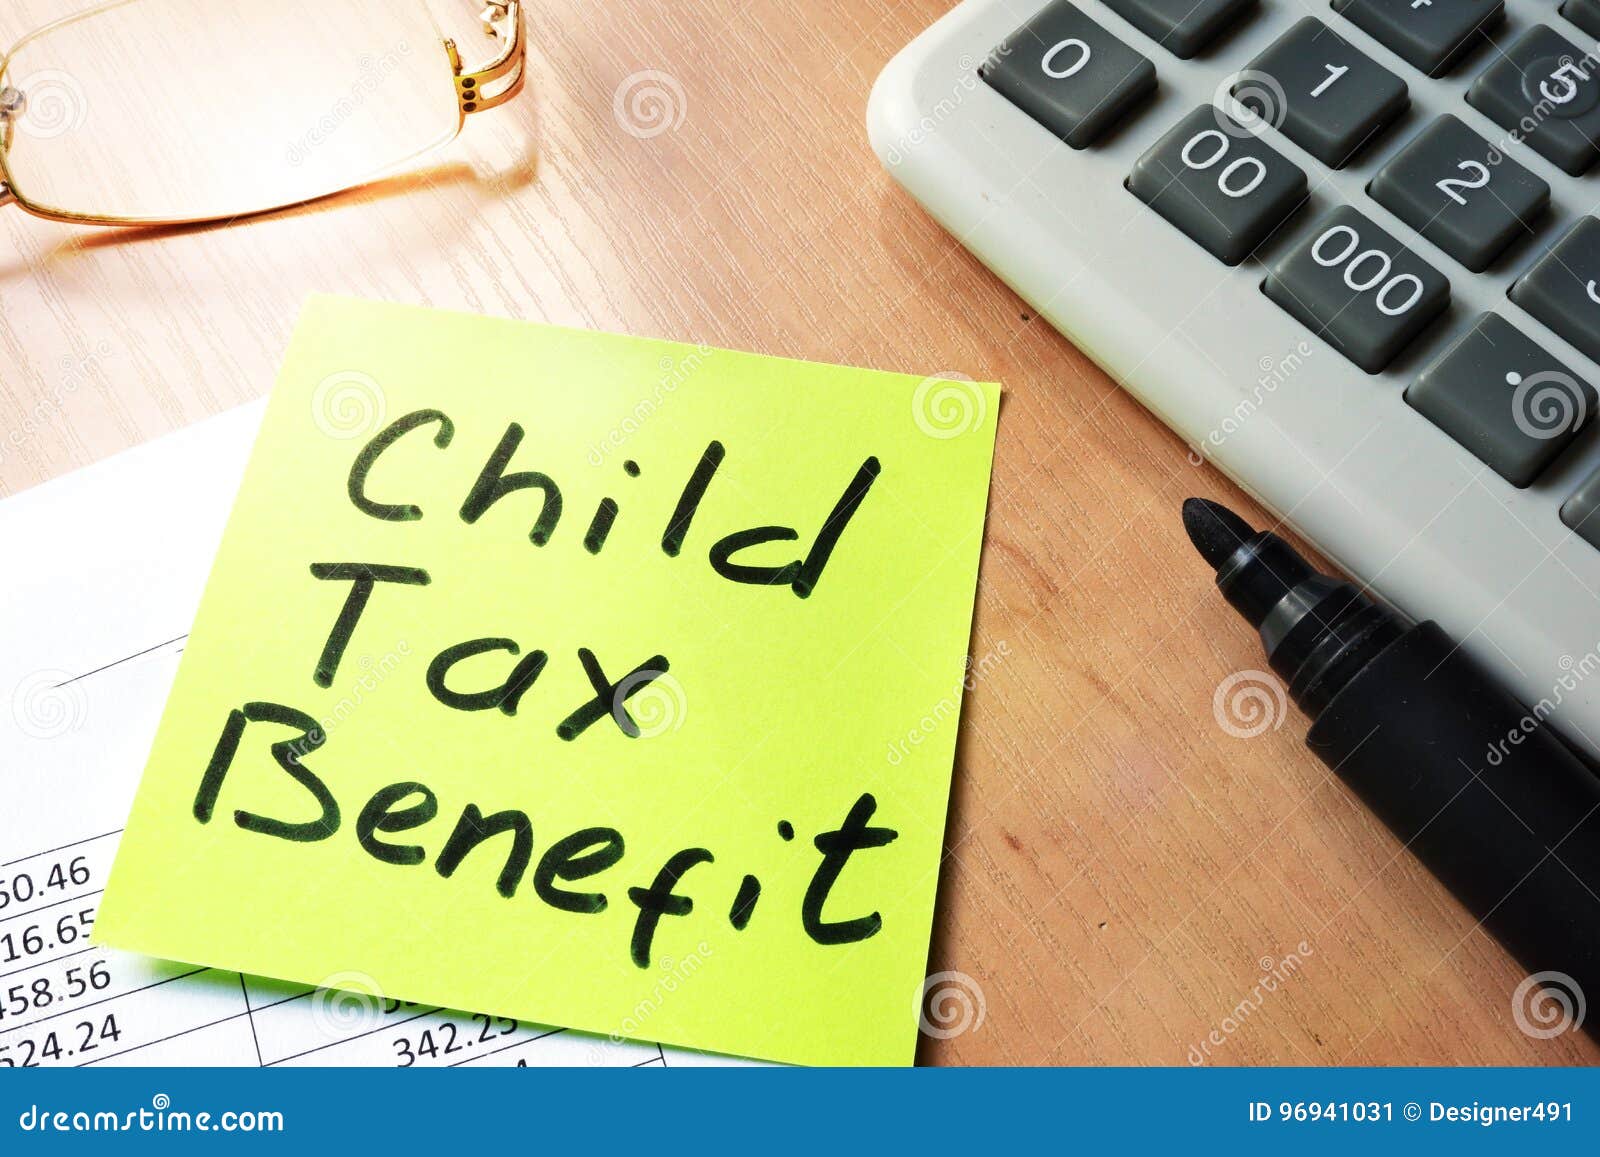 how-much-is-child-benefit-2023-leia-aqui-how-much-is-child-benefit-in